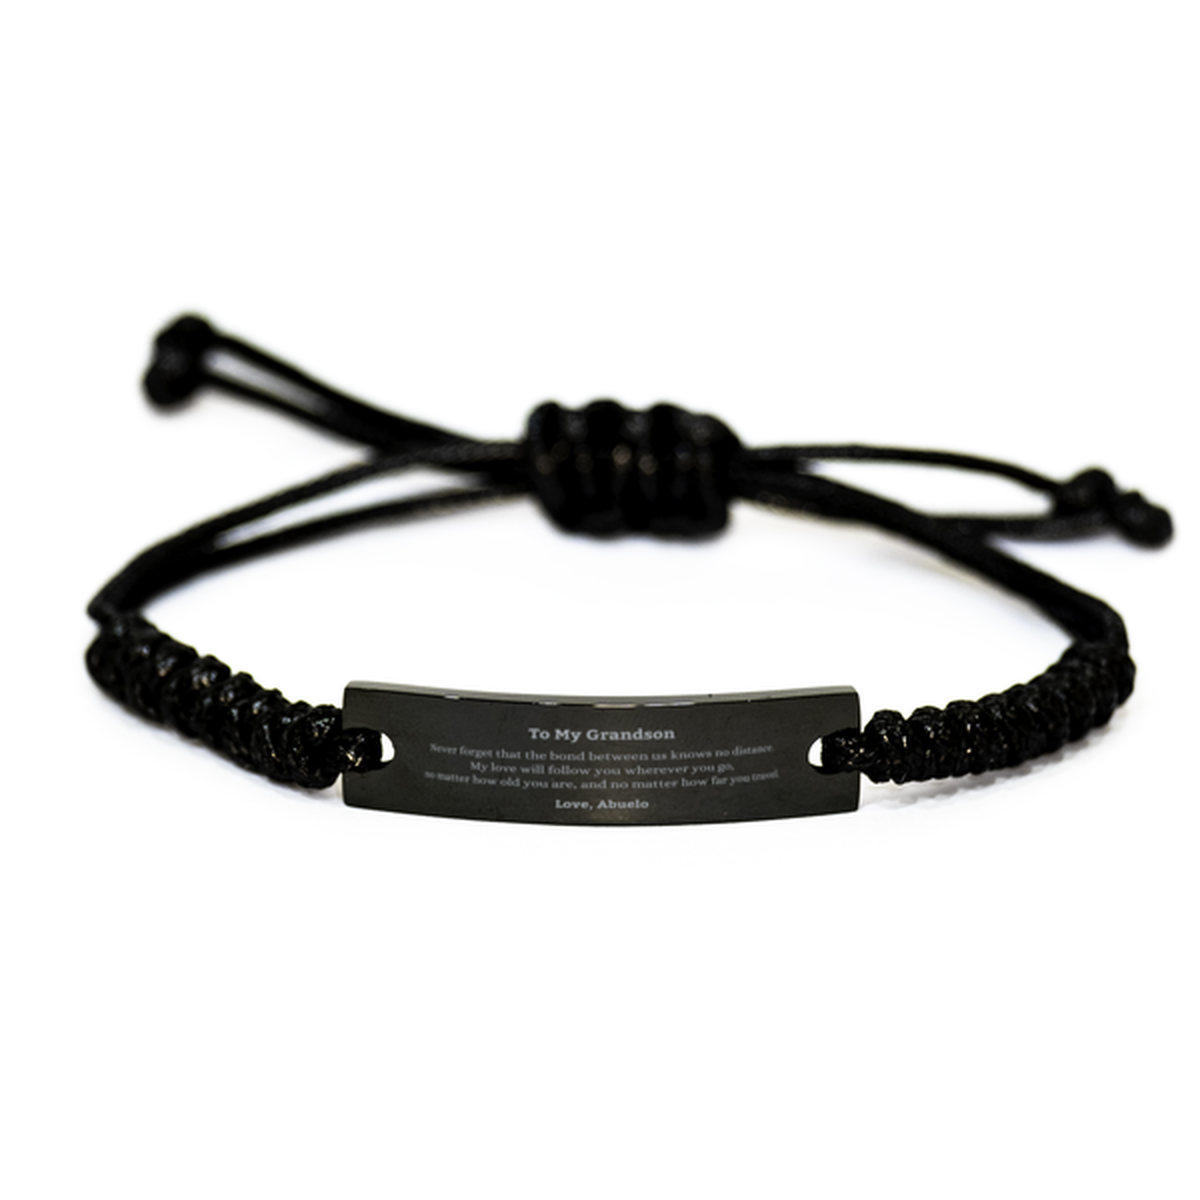 Grandson Birthday Gifts from Abuelo, Adjustable Black Rope Bracelet for Grandson Christmas Graduation Unique Gifts Grandson Never forget that the bond between us knows no distance. Love, Abuelo